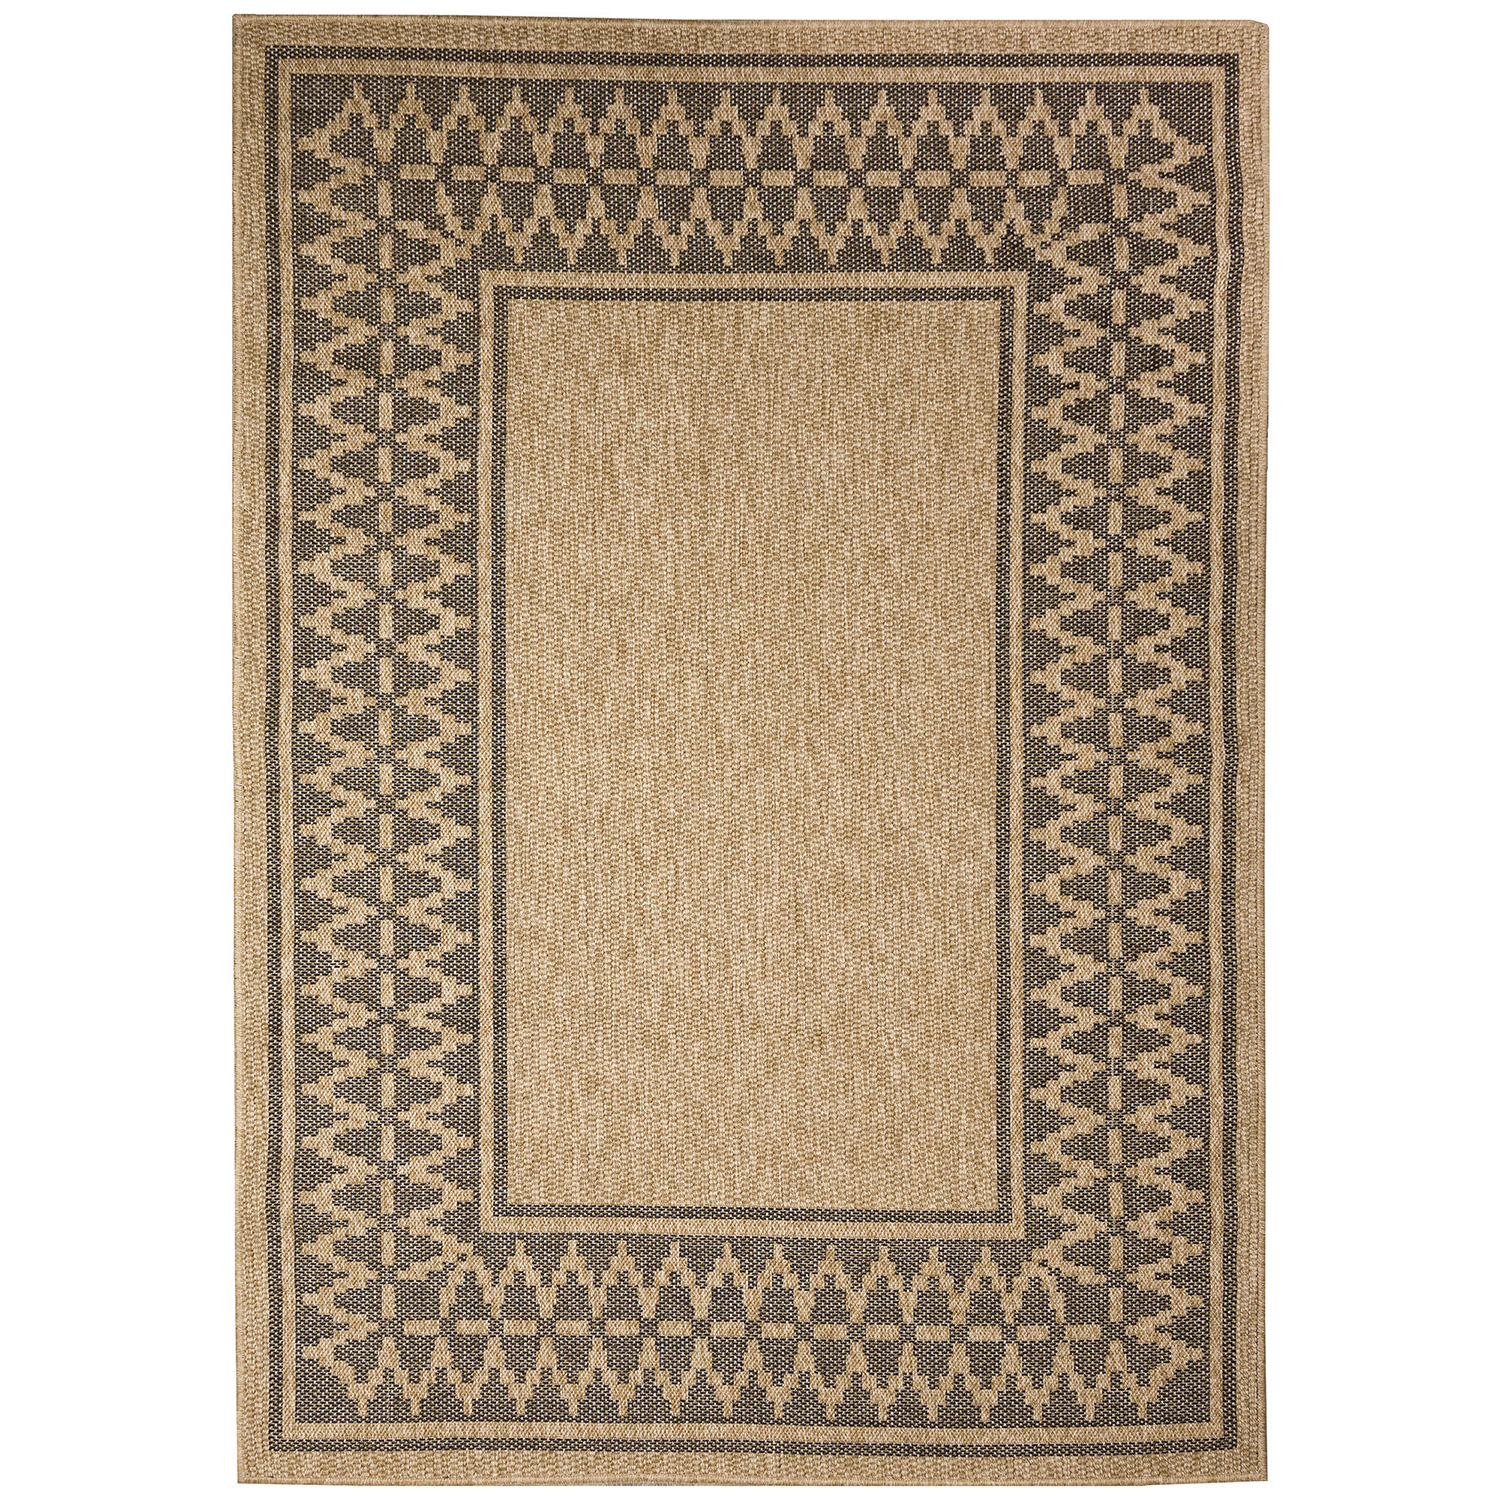 Liora Manne Sahara Low Profile  Easy Care Woven Weather Resistant Rug- Diamond Border Natural  Product Image